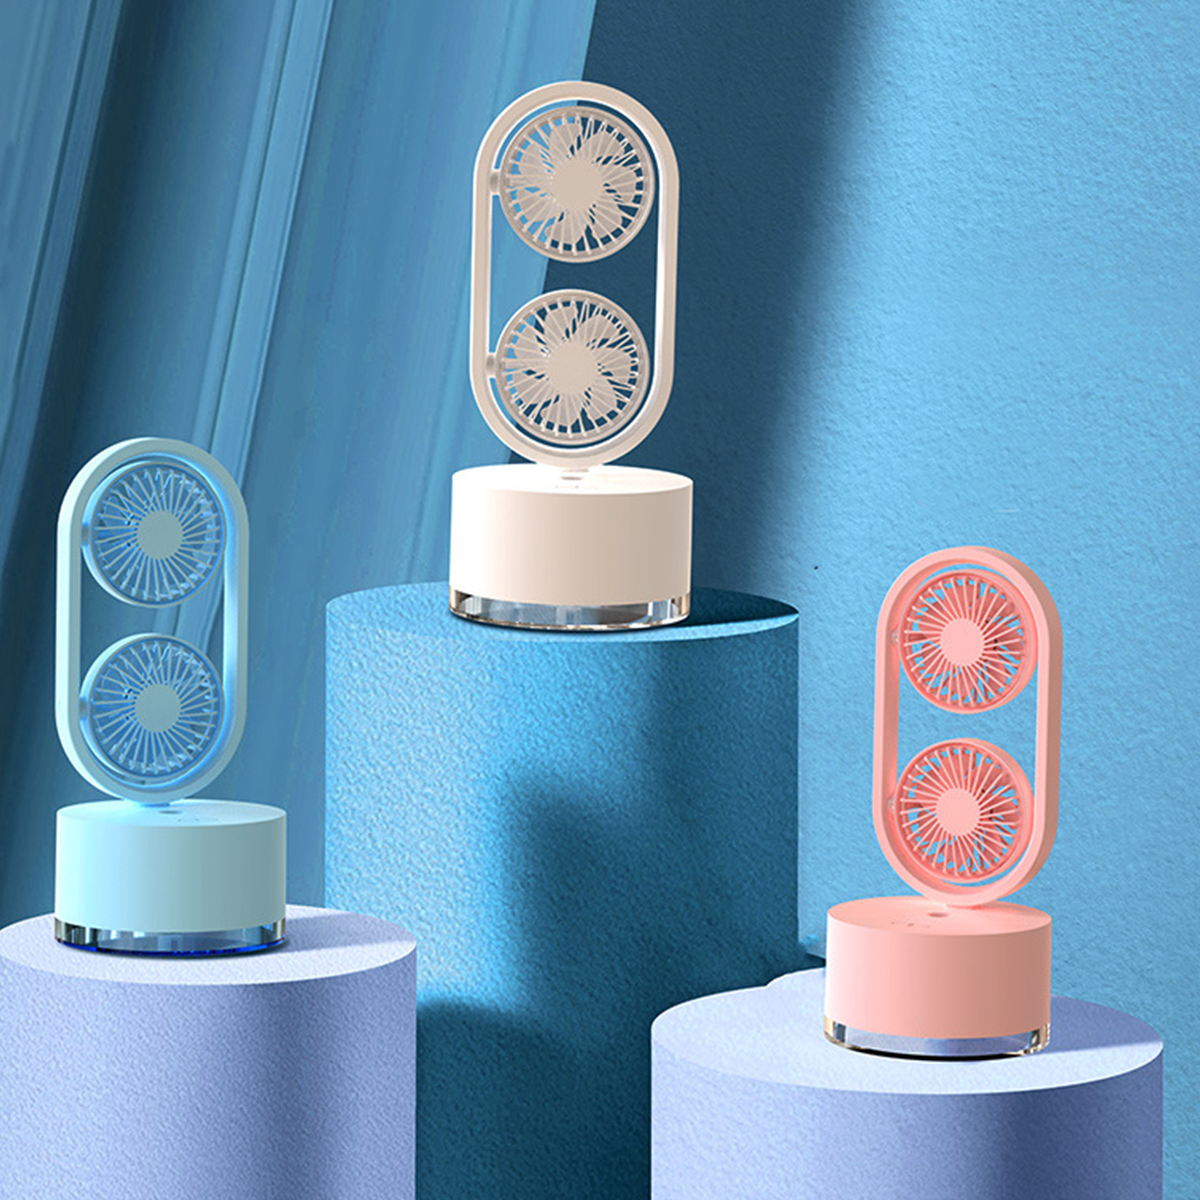 Mini-Dual-Head-Fan-3-Speeds-USB-Rechargeable-Air-Condition-Fan-400ml-Water-Tank-Spray-Humidification-1846006-1